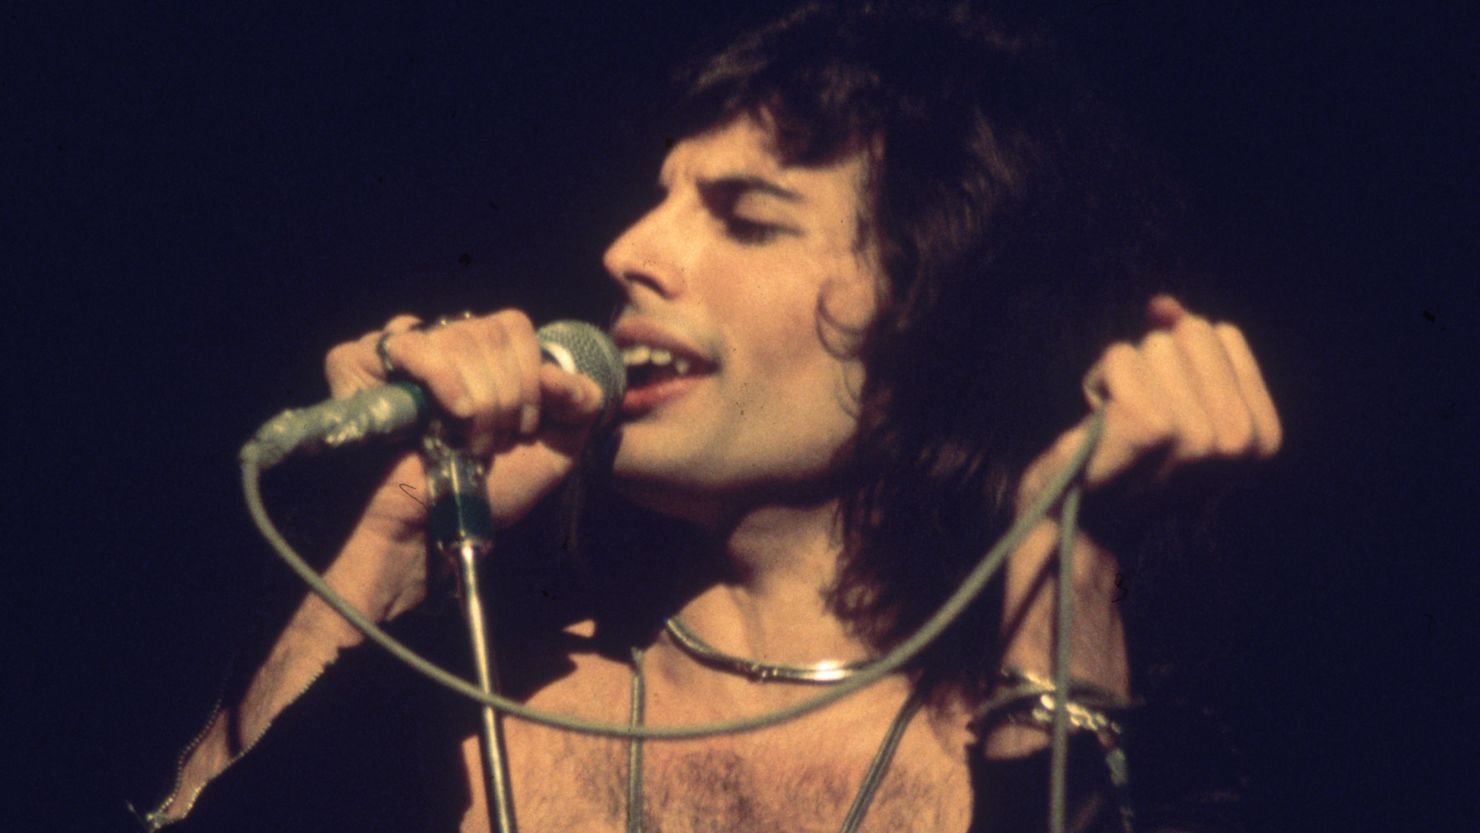 The International Astronomical Union's Minor Planet Center has named an asteroid after Freddie Mercury.